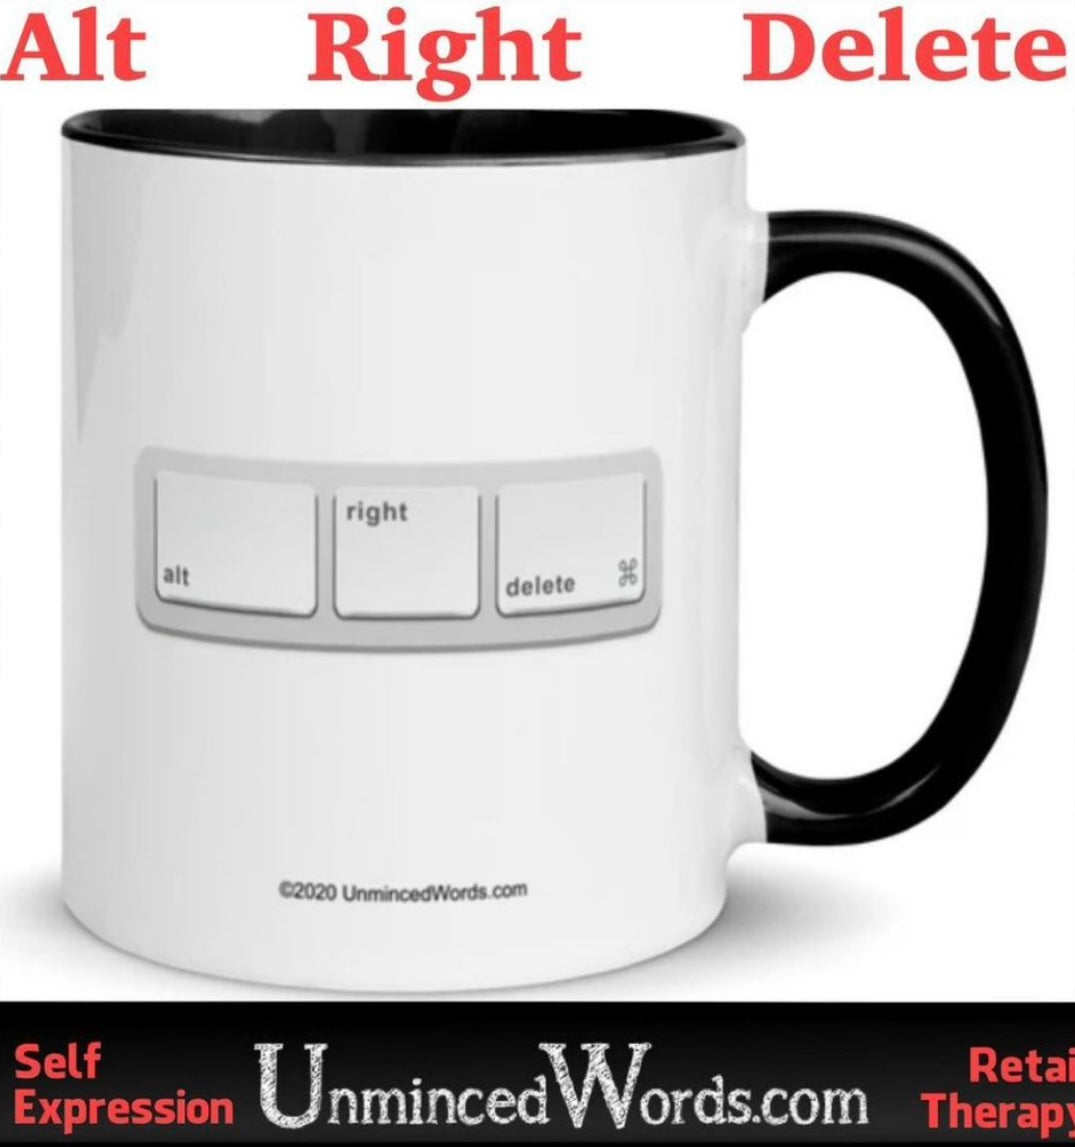 ALT RIGHT DELETE, A clever design & message from us, on mugs and shirts and such.